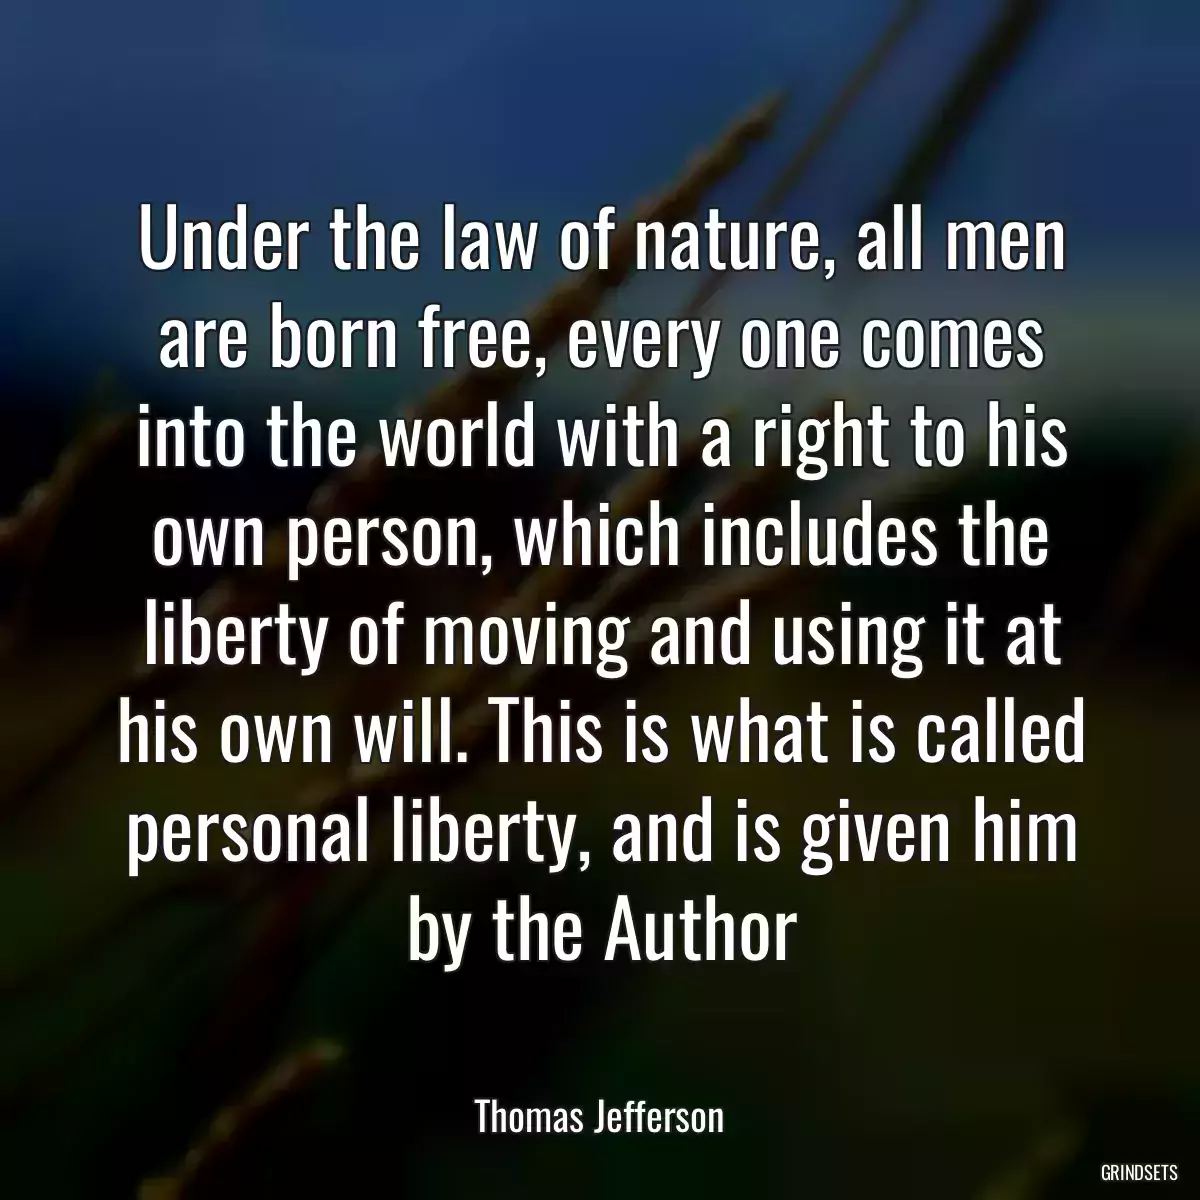 Under the law of nature, all men are born free, every one comes into the world with a right to his own person, which includes the liberty of moving and using it at his own will. This is what is called personal liberty, and is given him by the Author